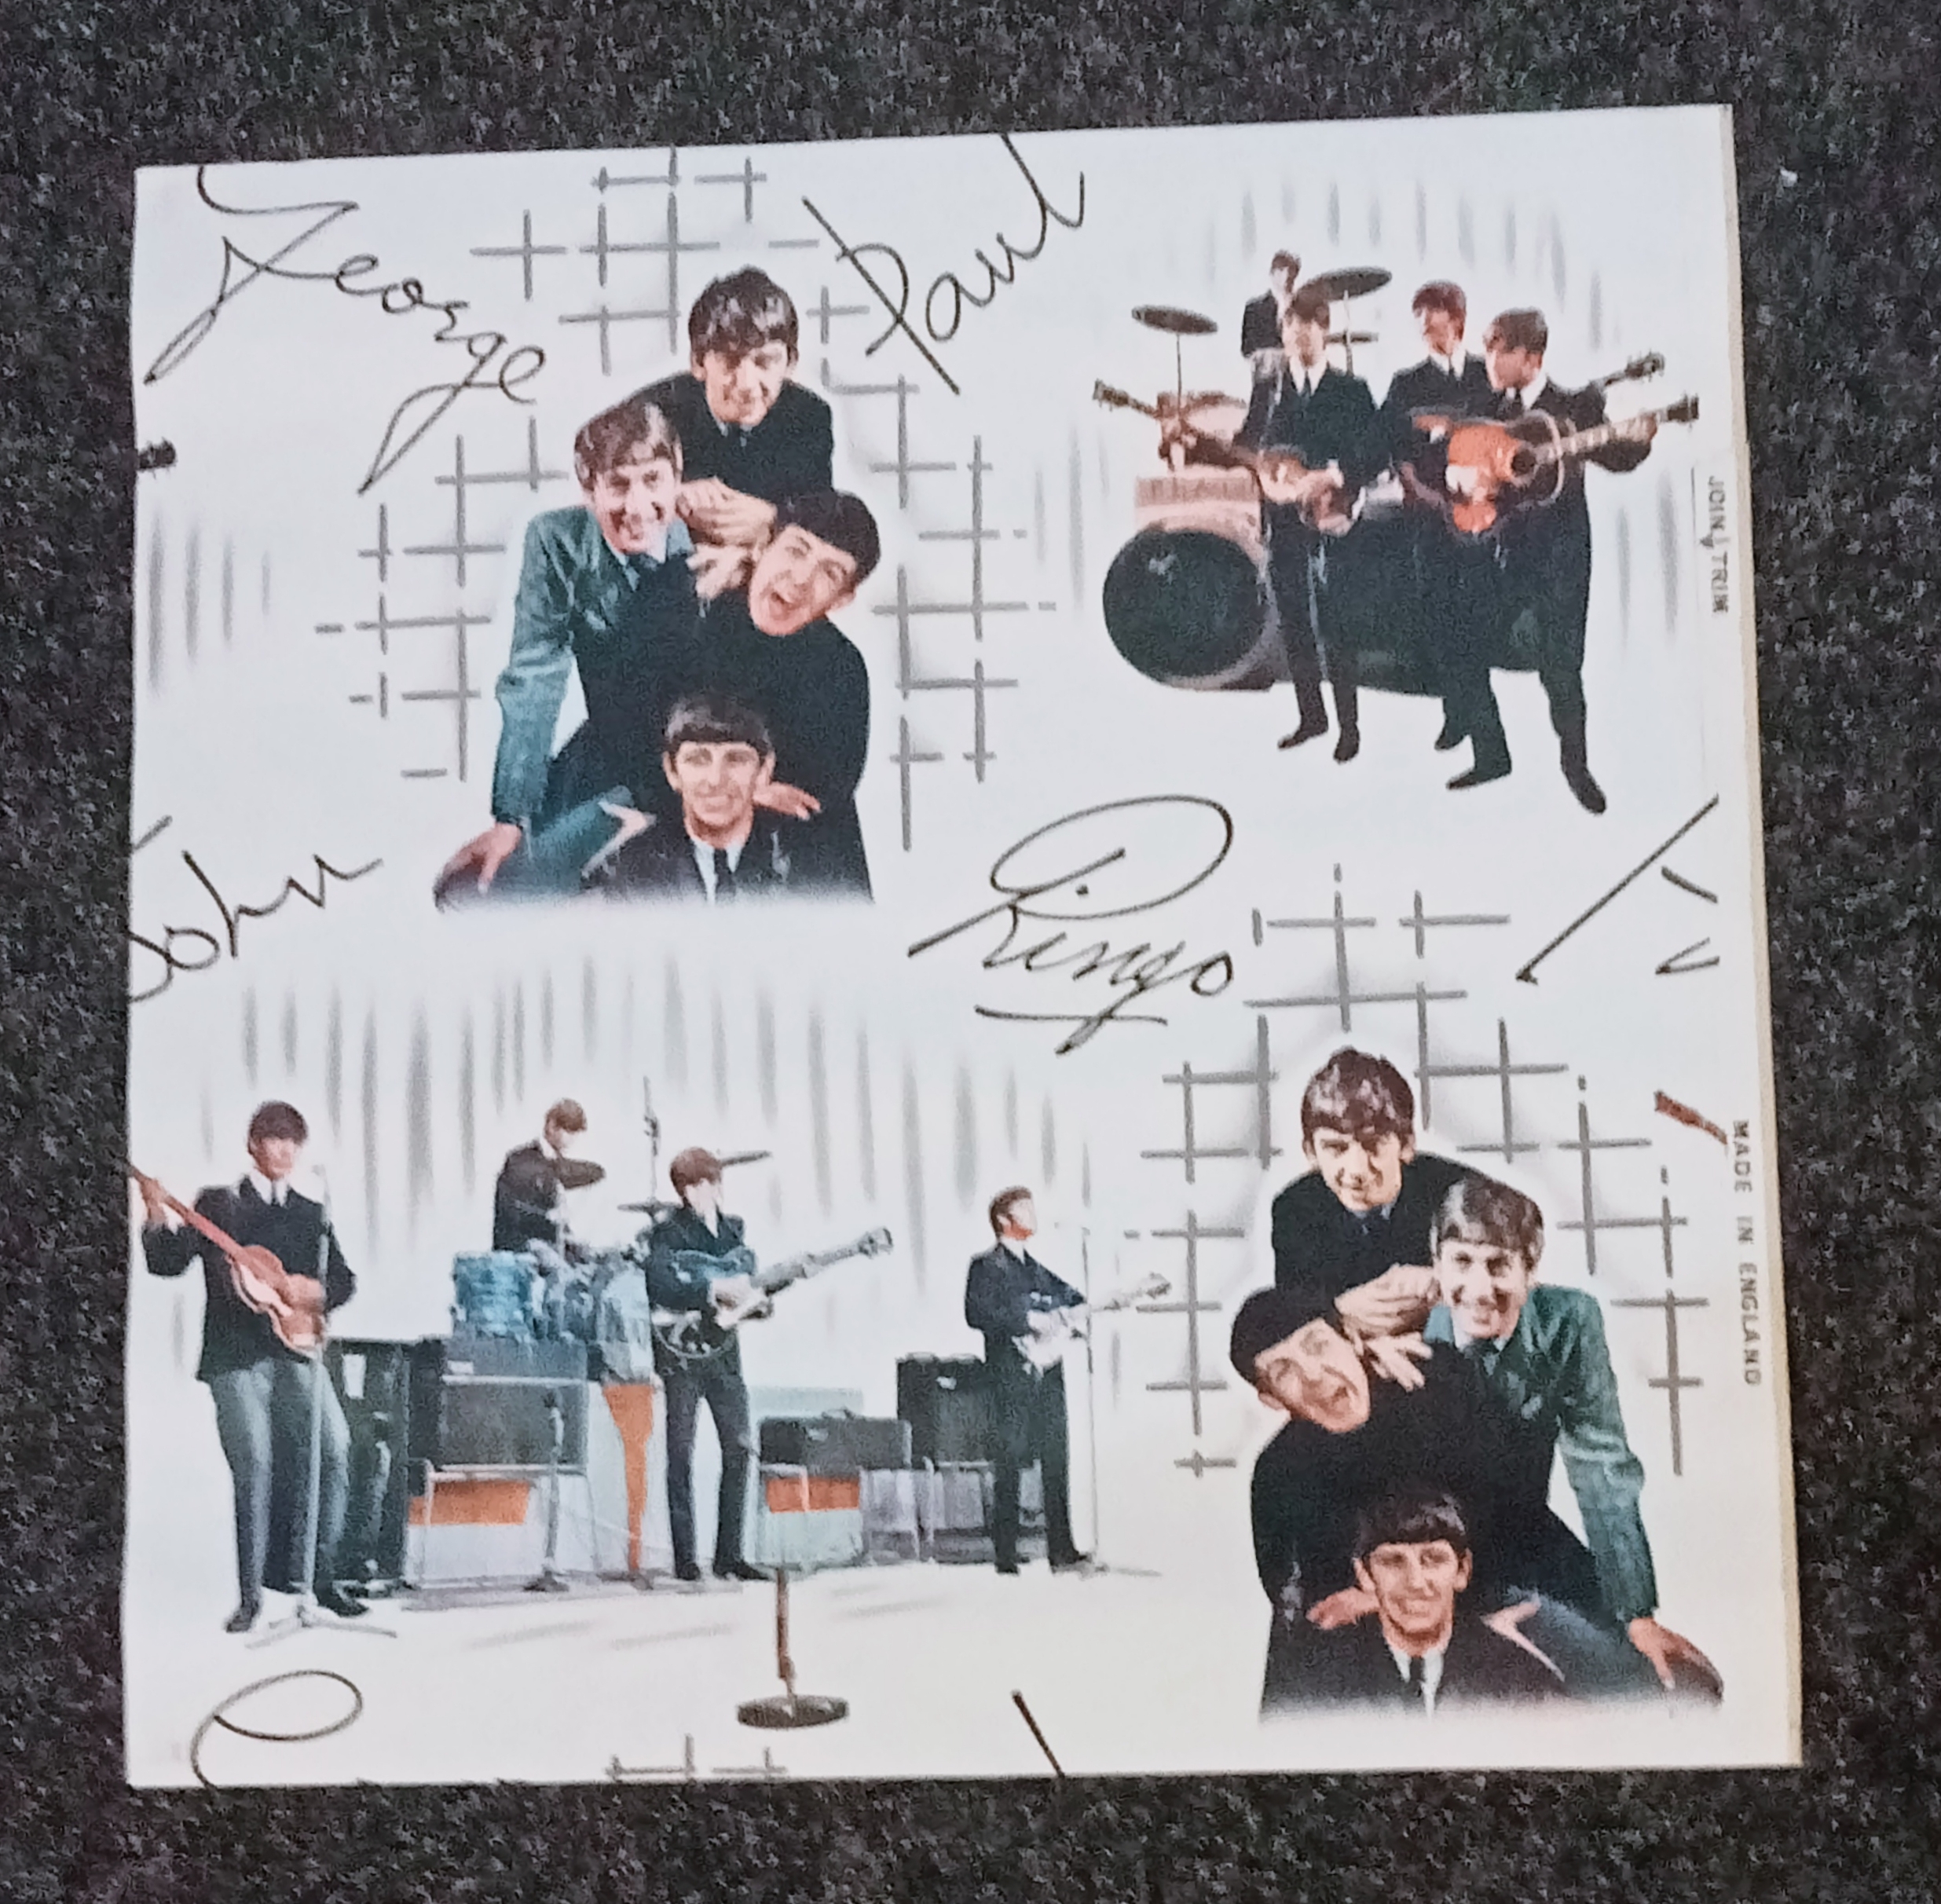 The Beatles approx 1 metre square section of Wall Paper.